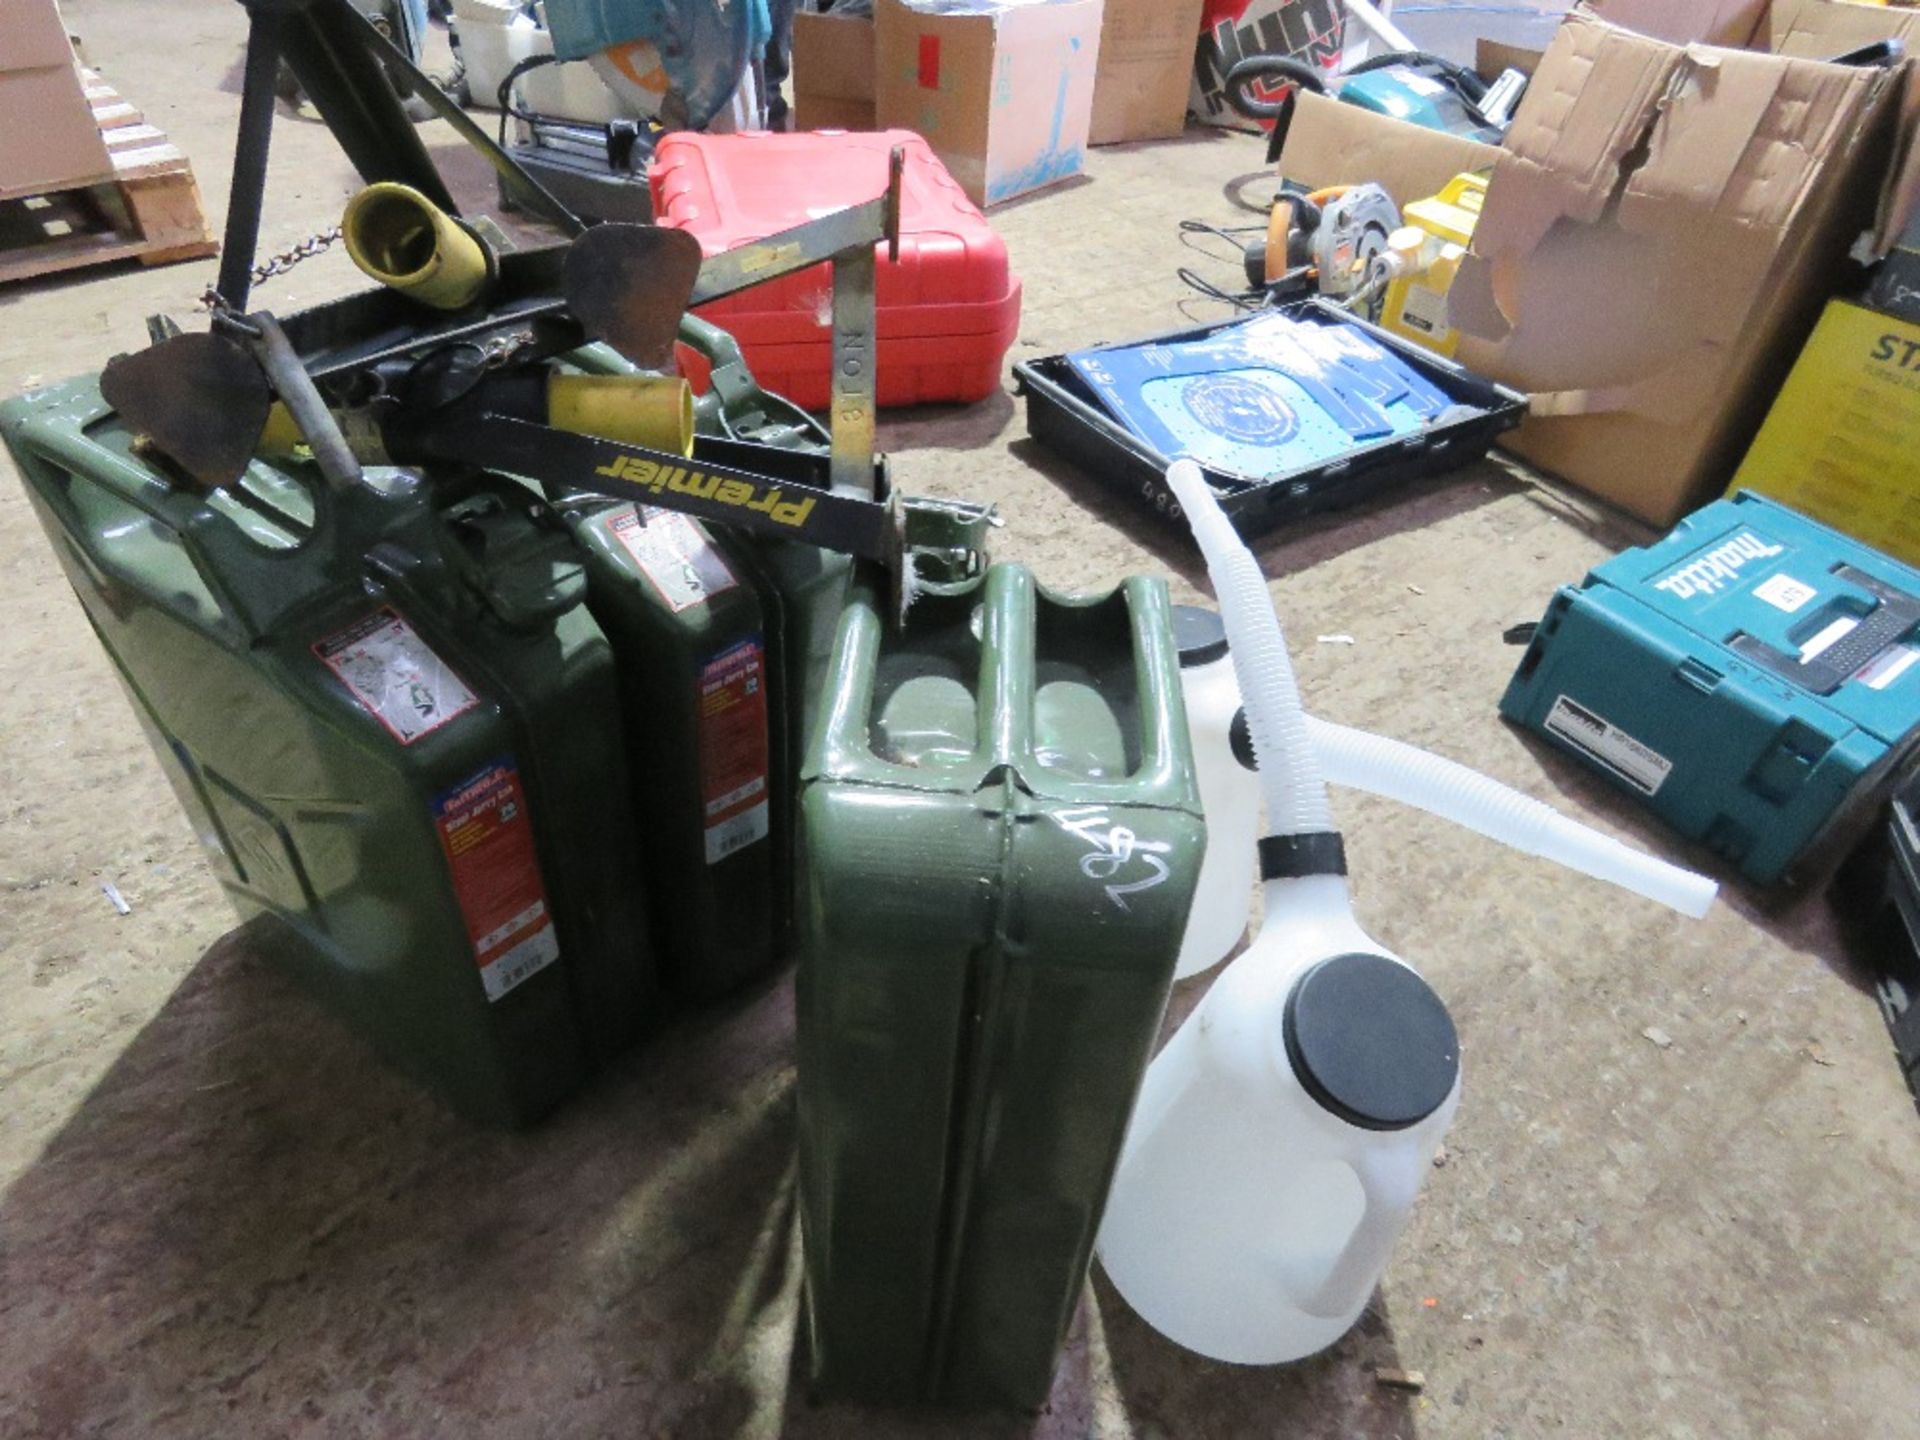 3 X JERRY CANS, 2 X AXLE STANDS AND 3 X OIL JUGS. - Image 2 of 2